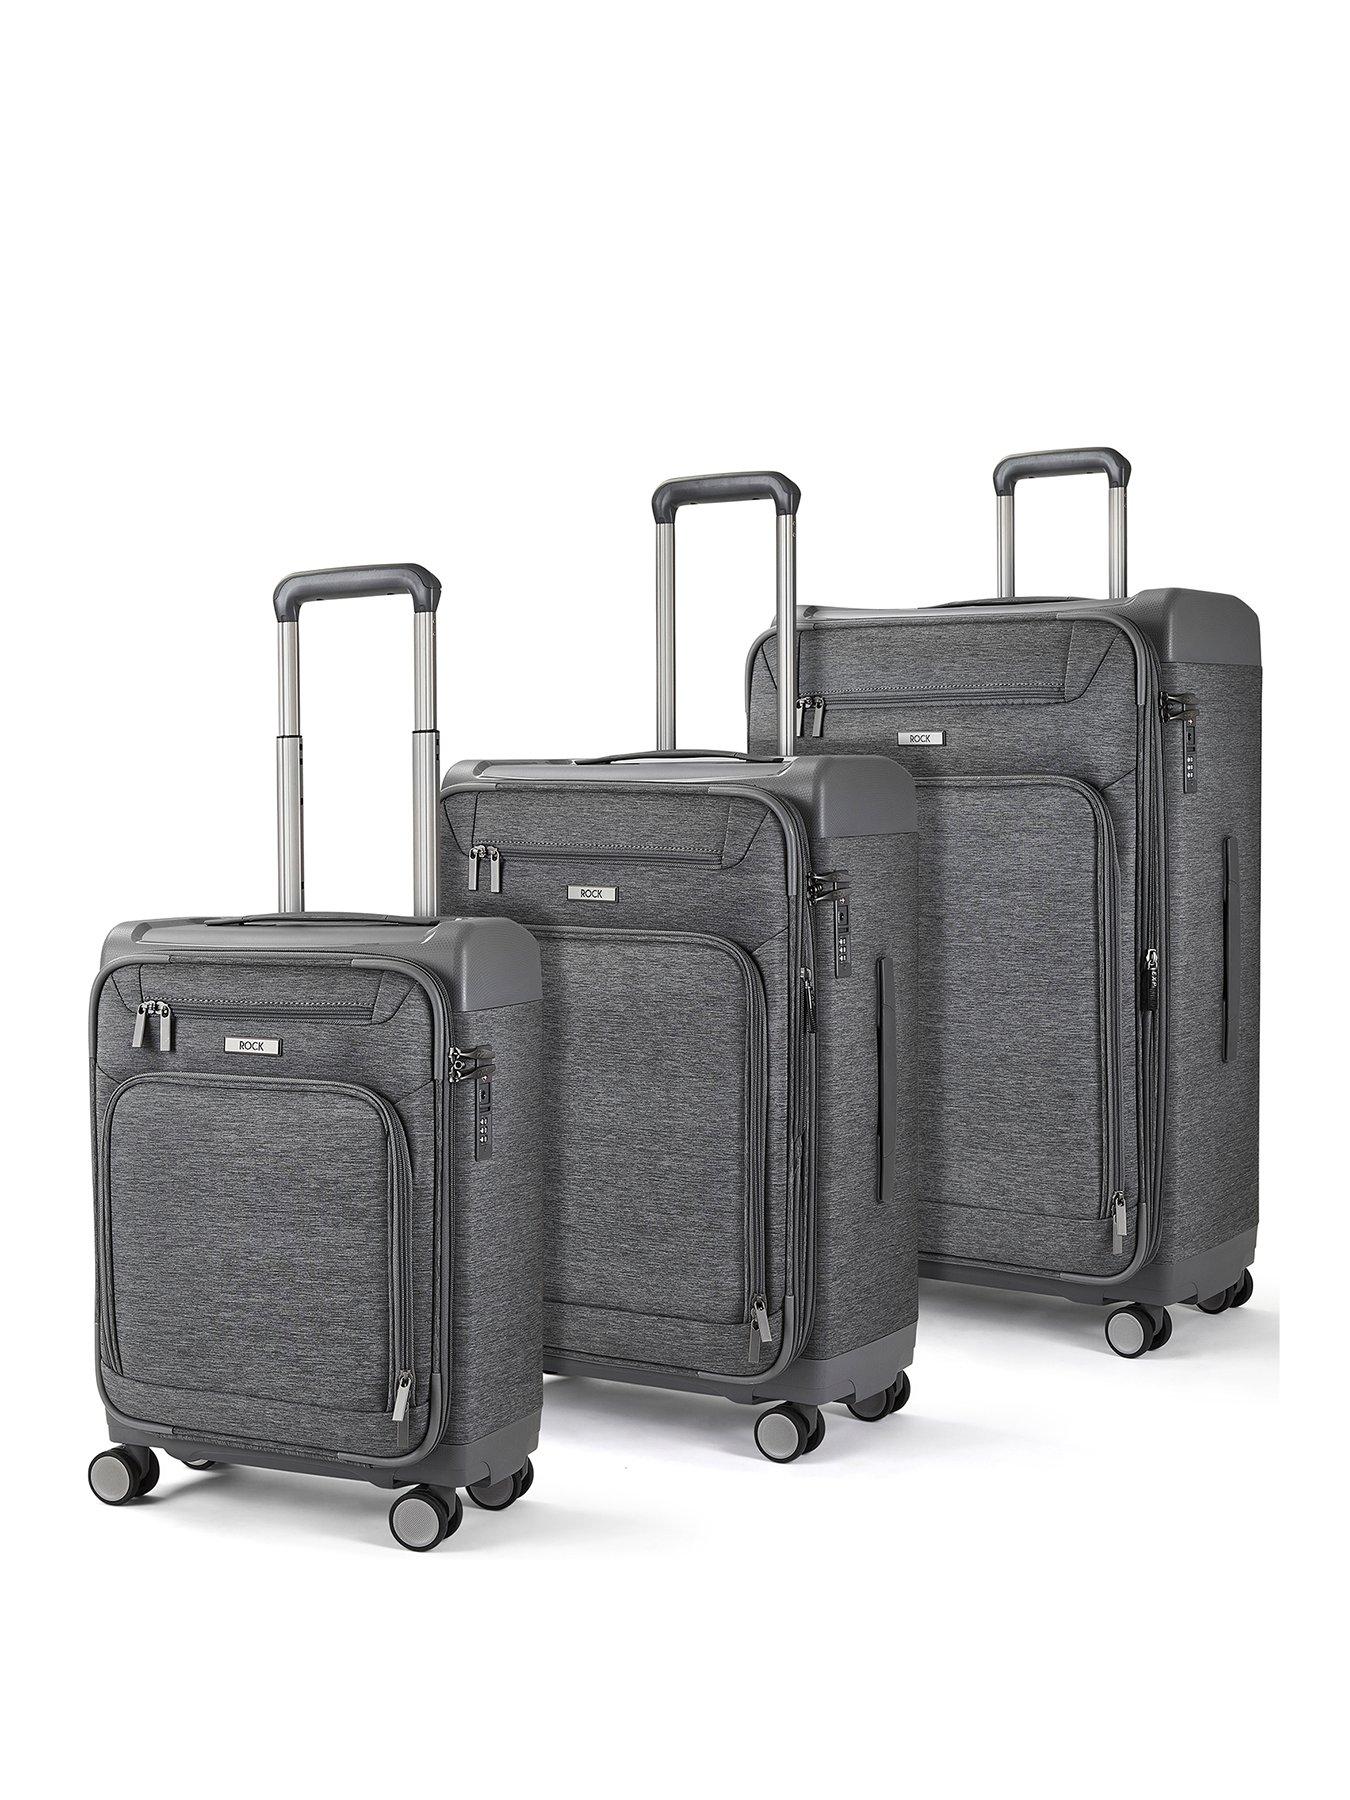 Rock Luggage Parker 8-Wheel Suitcases 3 piece Set - Grey | very.co.uk